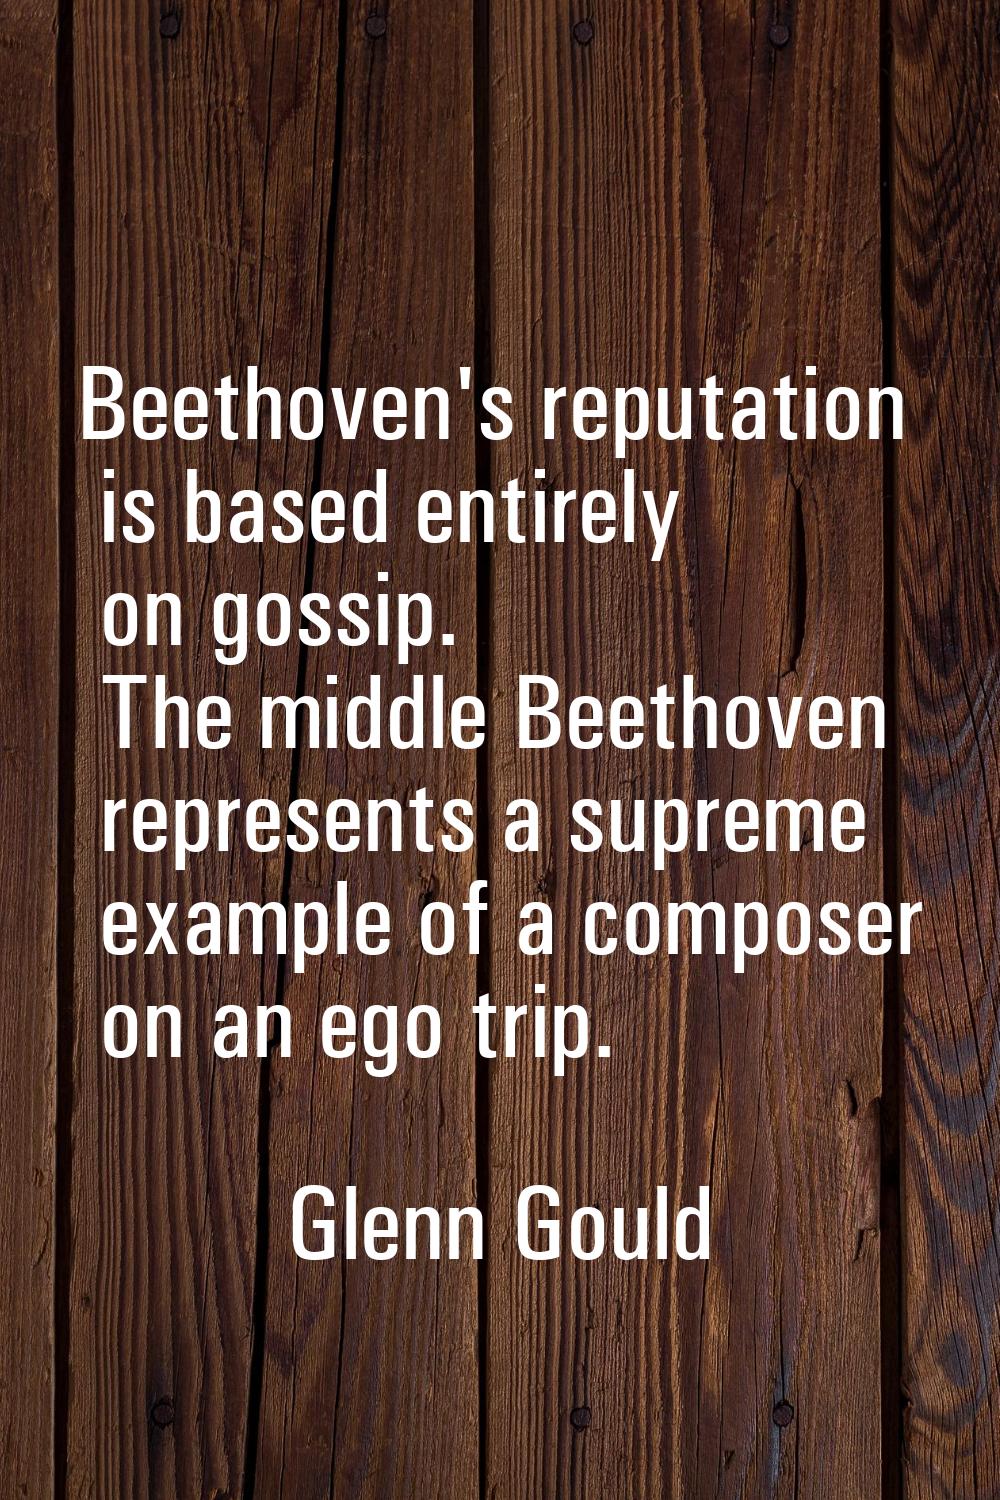 Beethoven's reputation is based entirely on gossip. The middle Beethoven represents a supreme examp